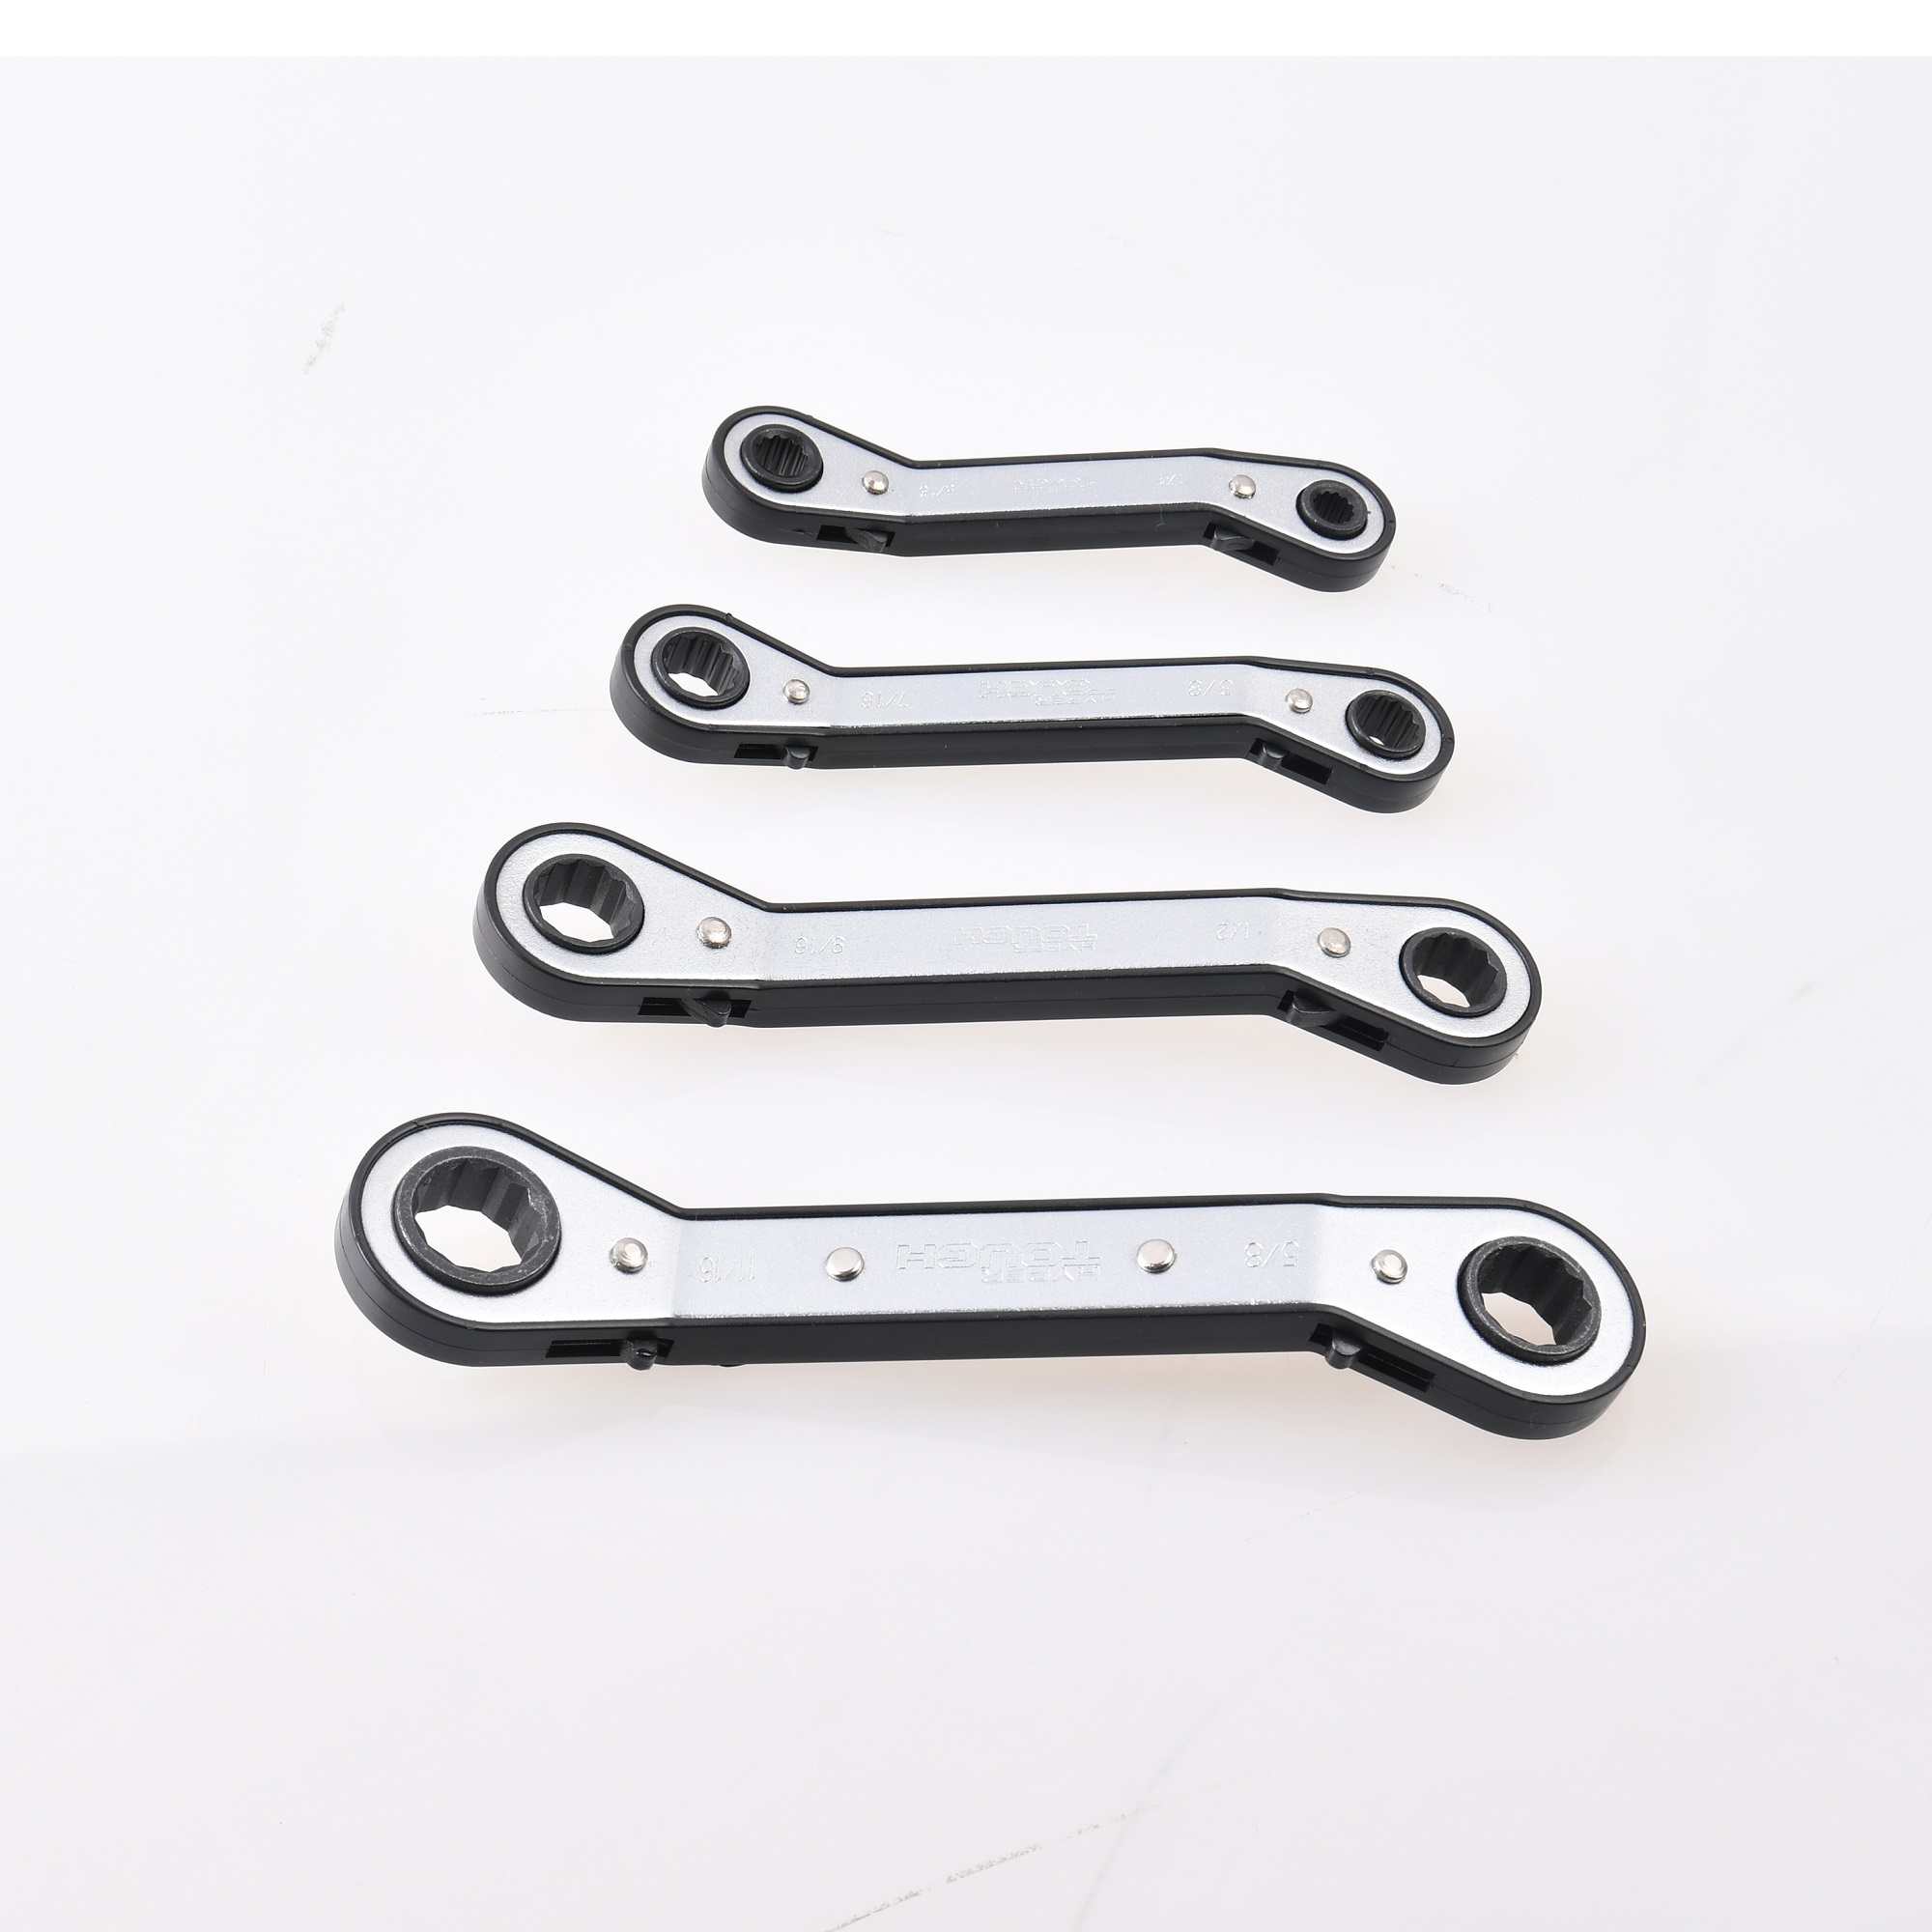 Hyper Tough Heavy-Duty 4-Piece SAE Ratchet Wrench Set - image 3 of 9